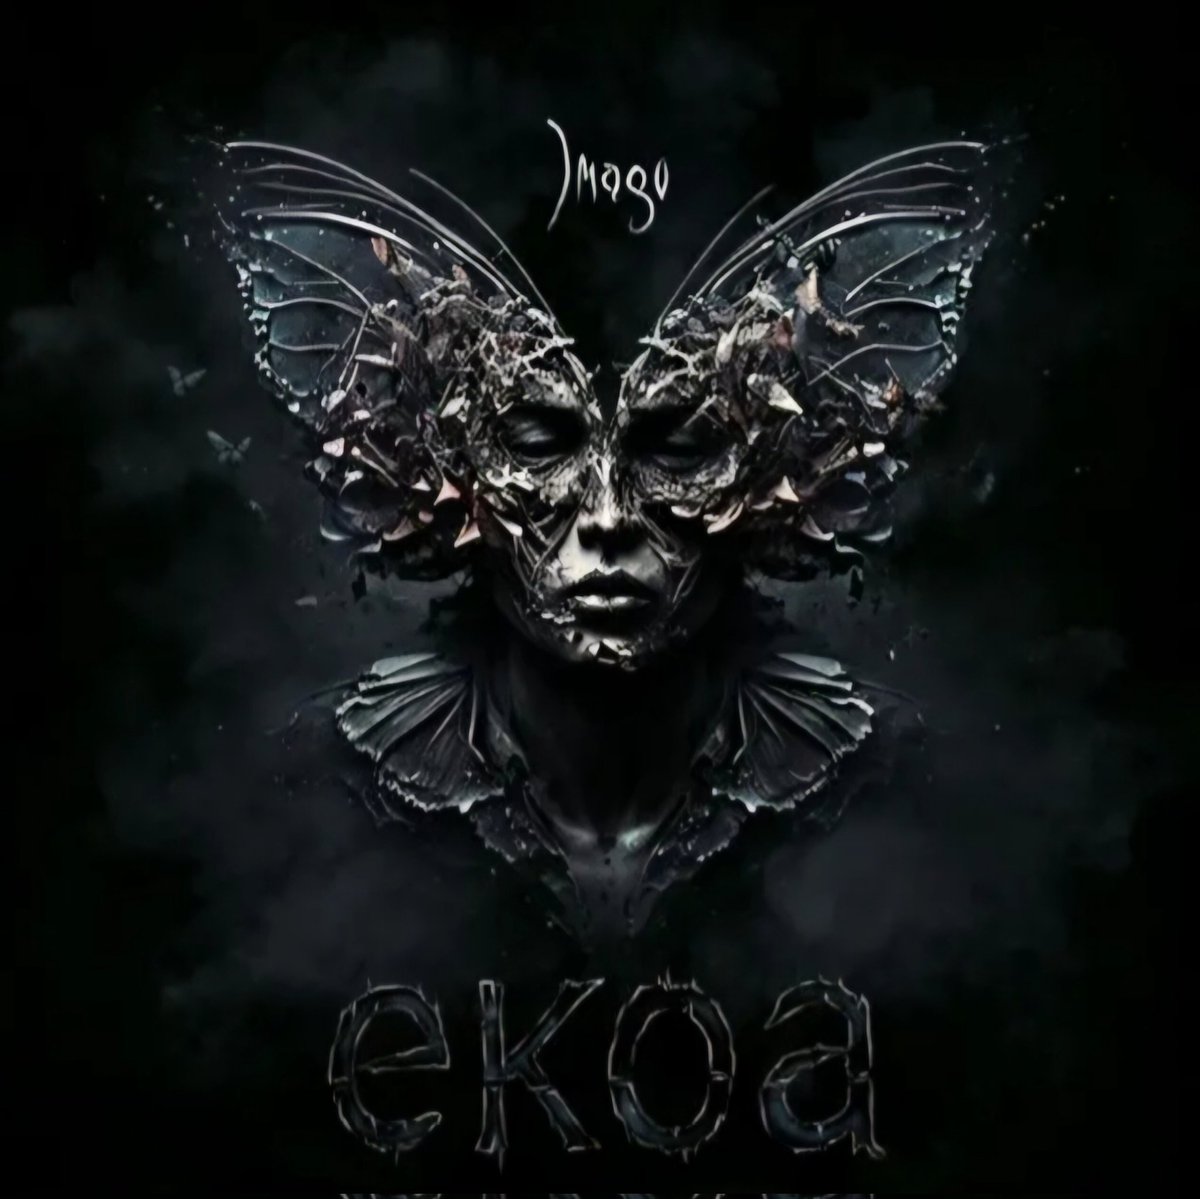 New song from Ekoa out now! #music #newmusic #nowplaying #newmusic2024 #rock #metal #follow #song #listentothis #instamusic #band #artist #promote #instagood #instalike #newtunes #tunes #trending #influencer #musicinfluencer #MMSL #metalmusic #musicpromotion #ekoa #shadows